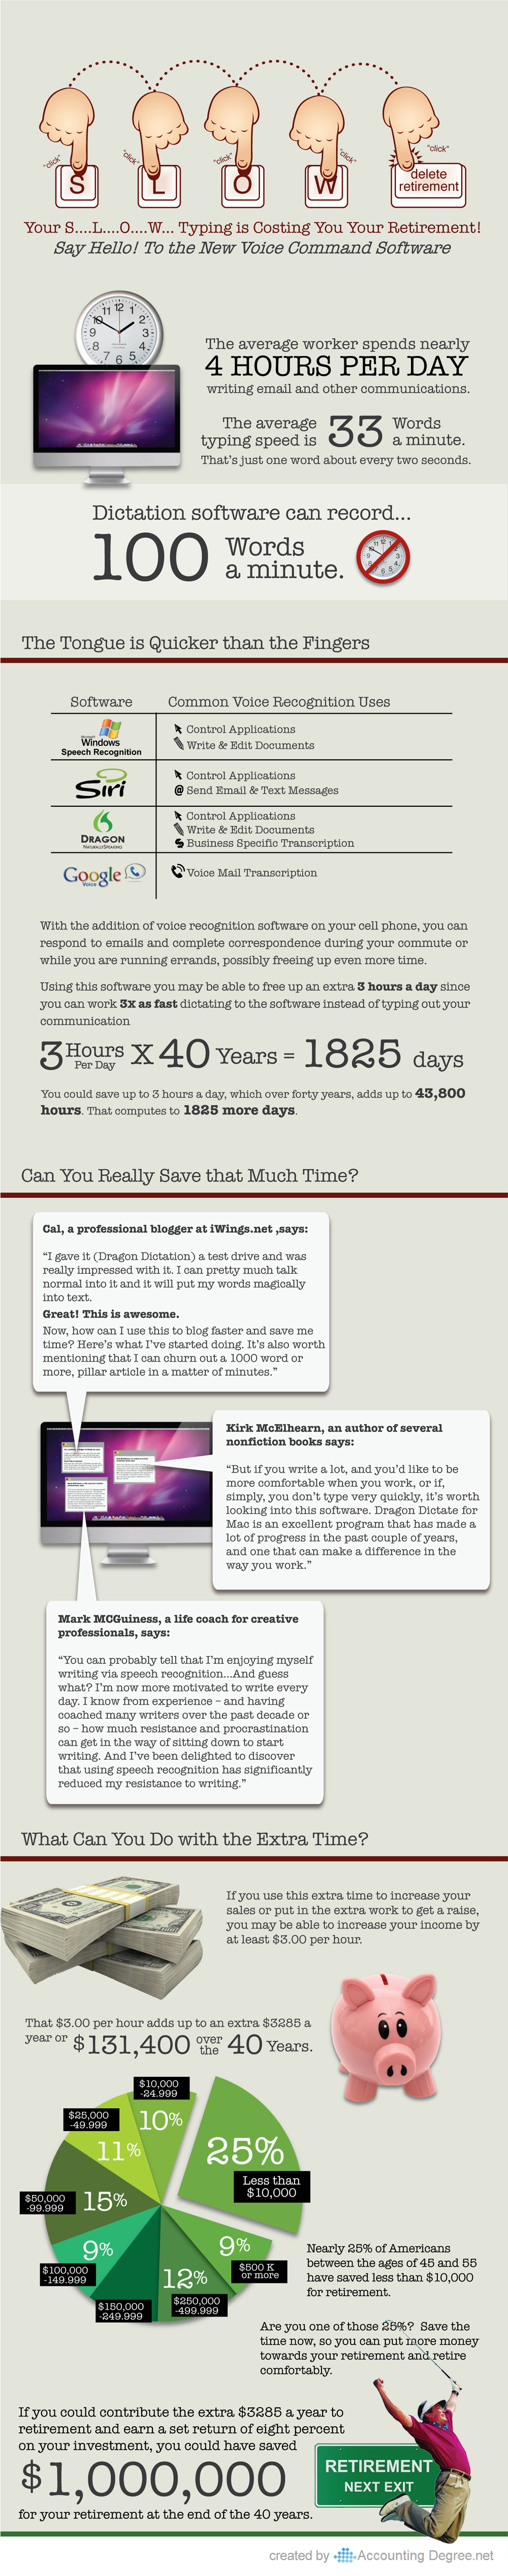 How Dictation Tools Can Help Speed Up Your Workflow [INFOGRAPHIC]